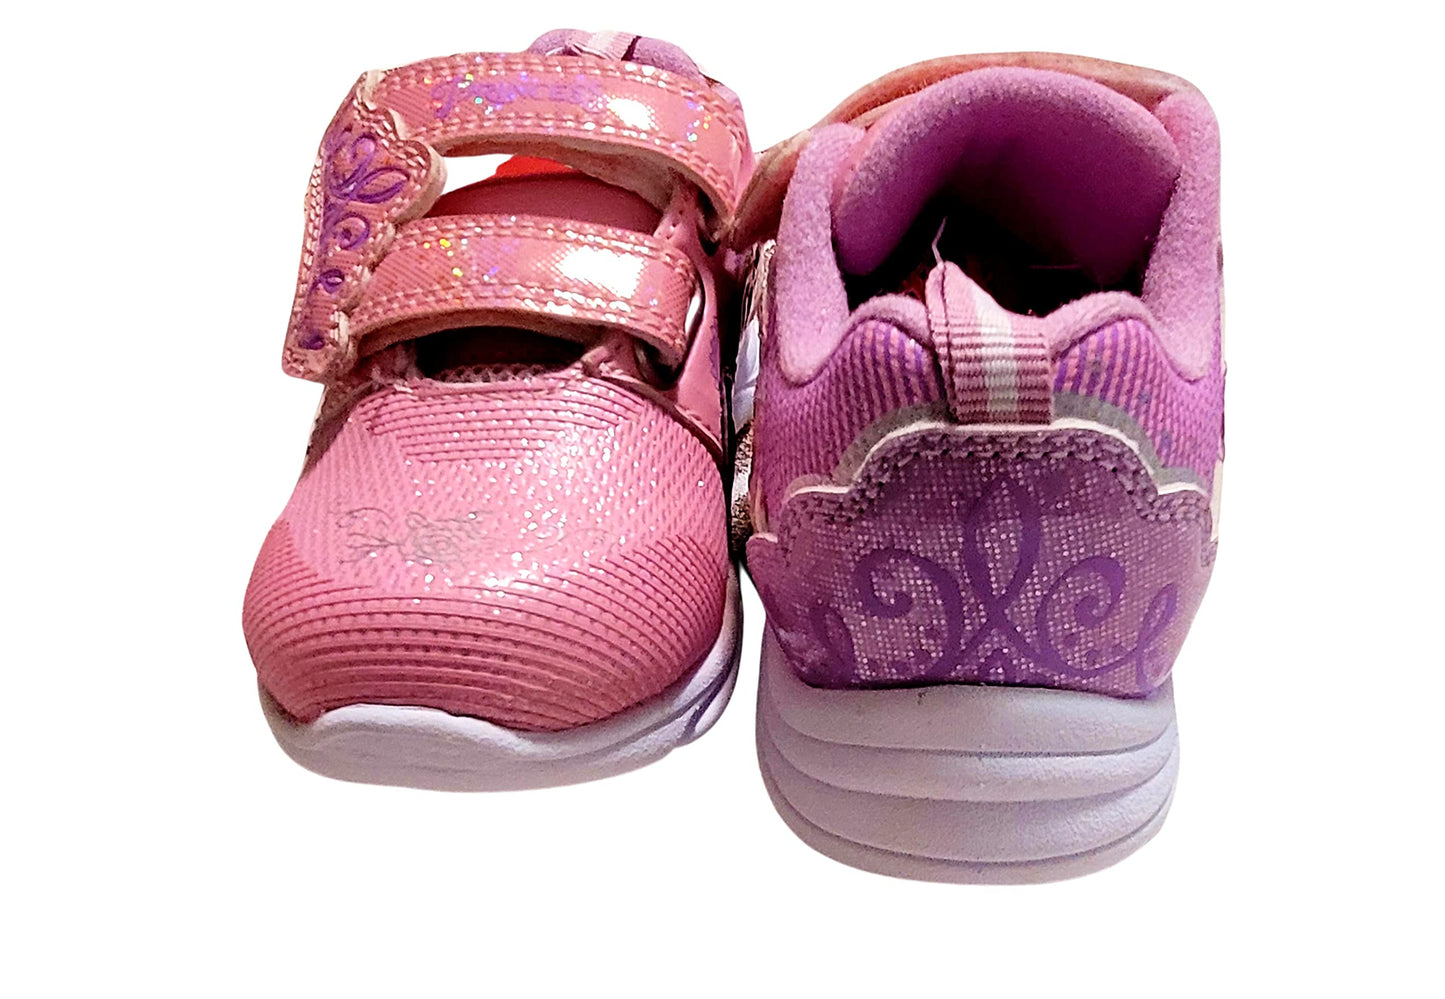 Disney Princess Girl's Lighted Athletic Sneaker, Lilac/Pink (Toddler/Little Kid)